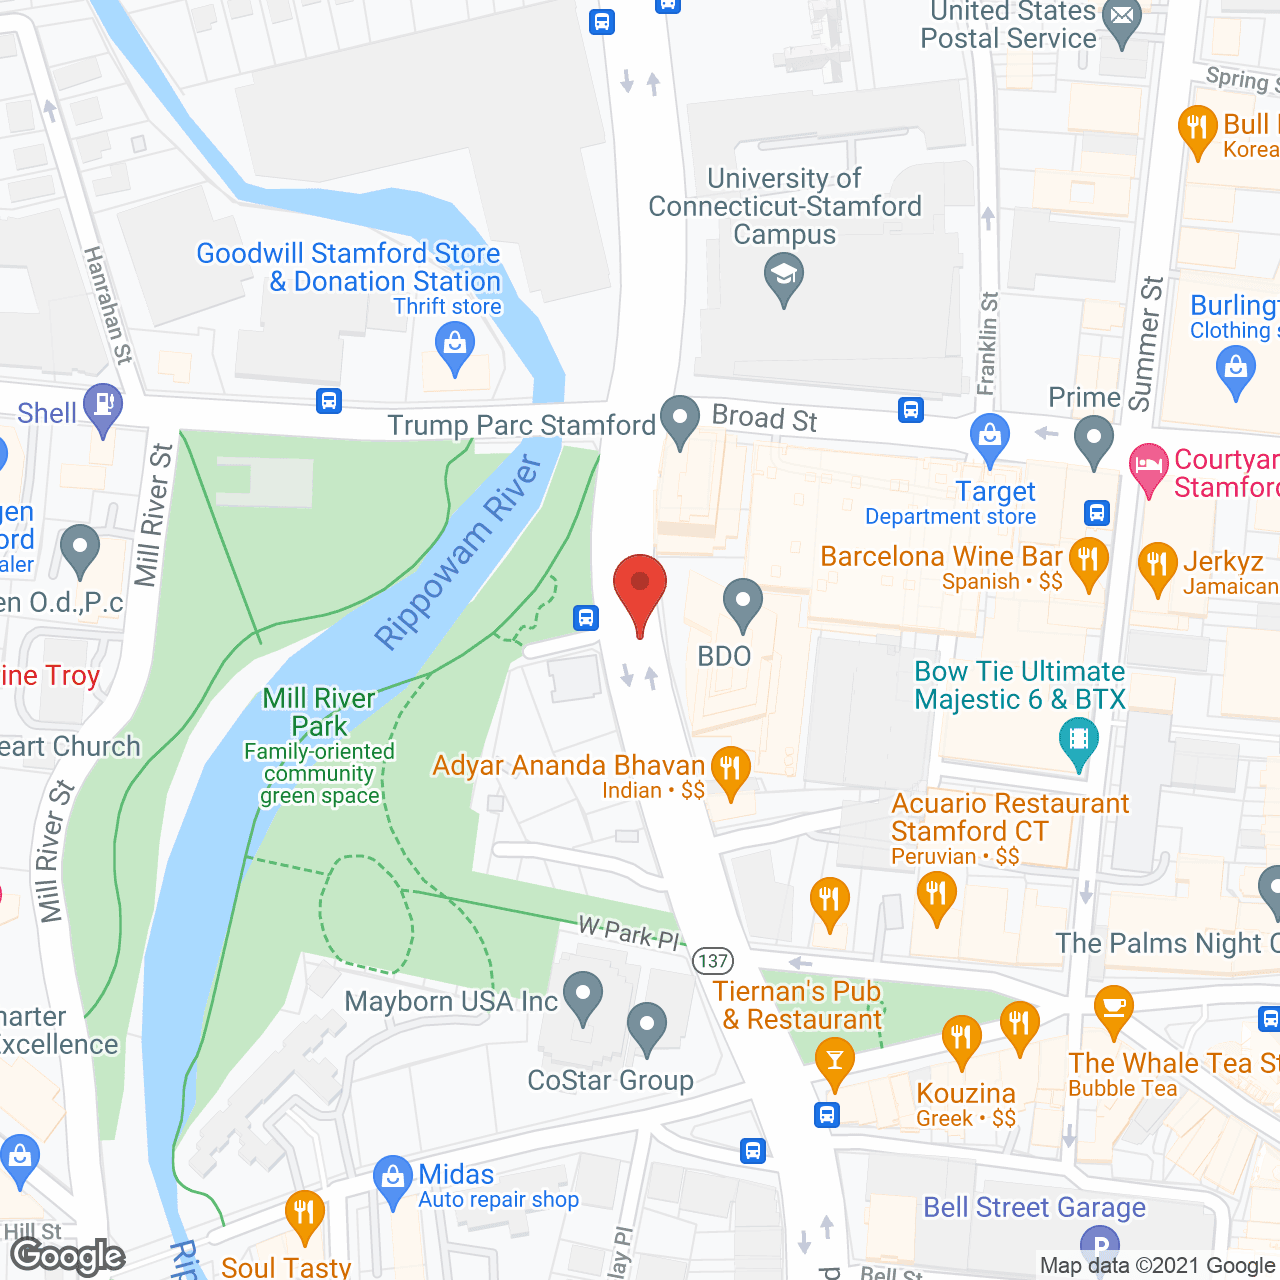 Unity Home Care Agency in google map